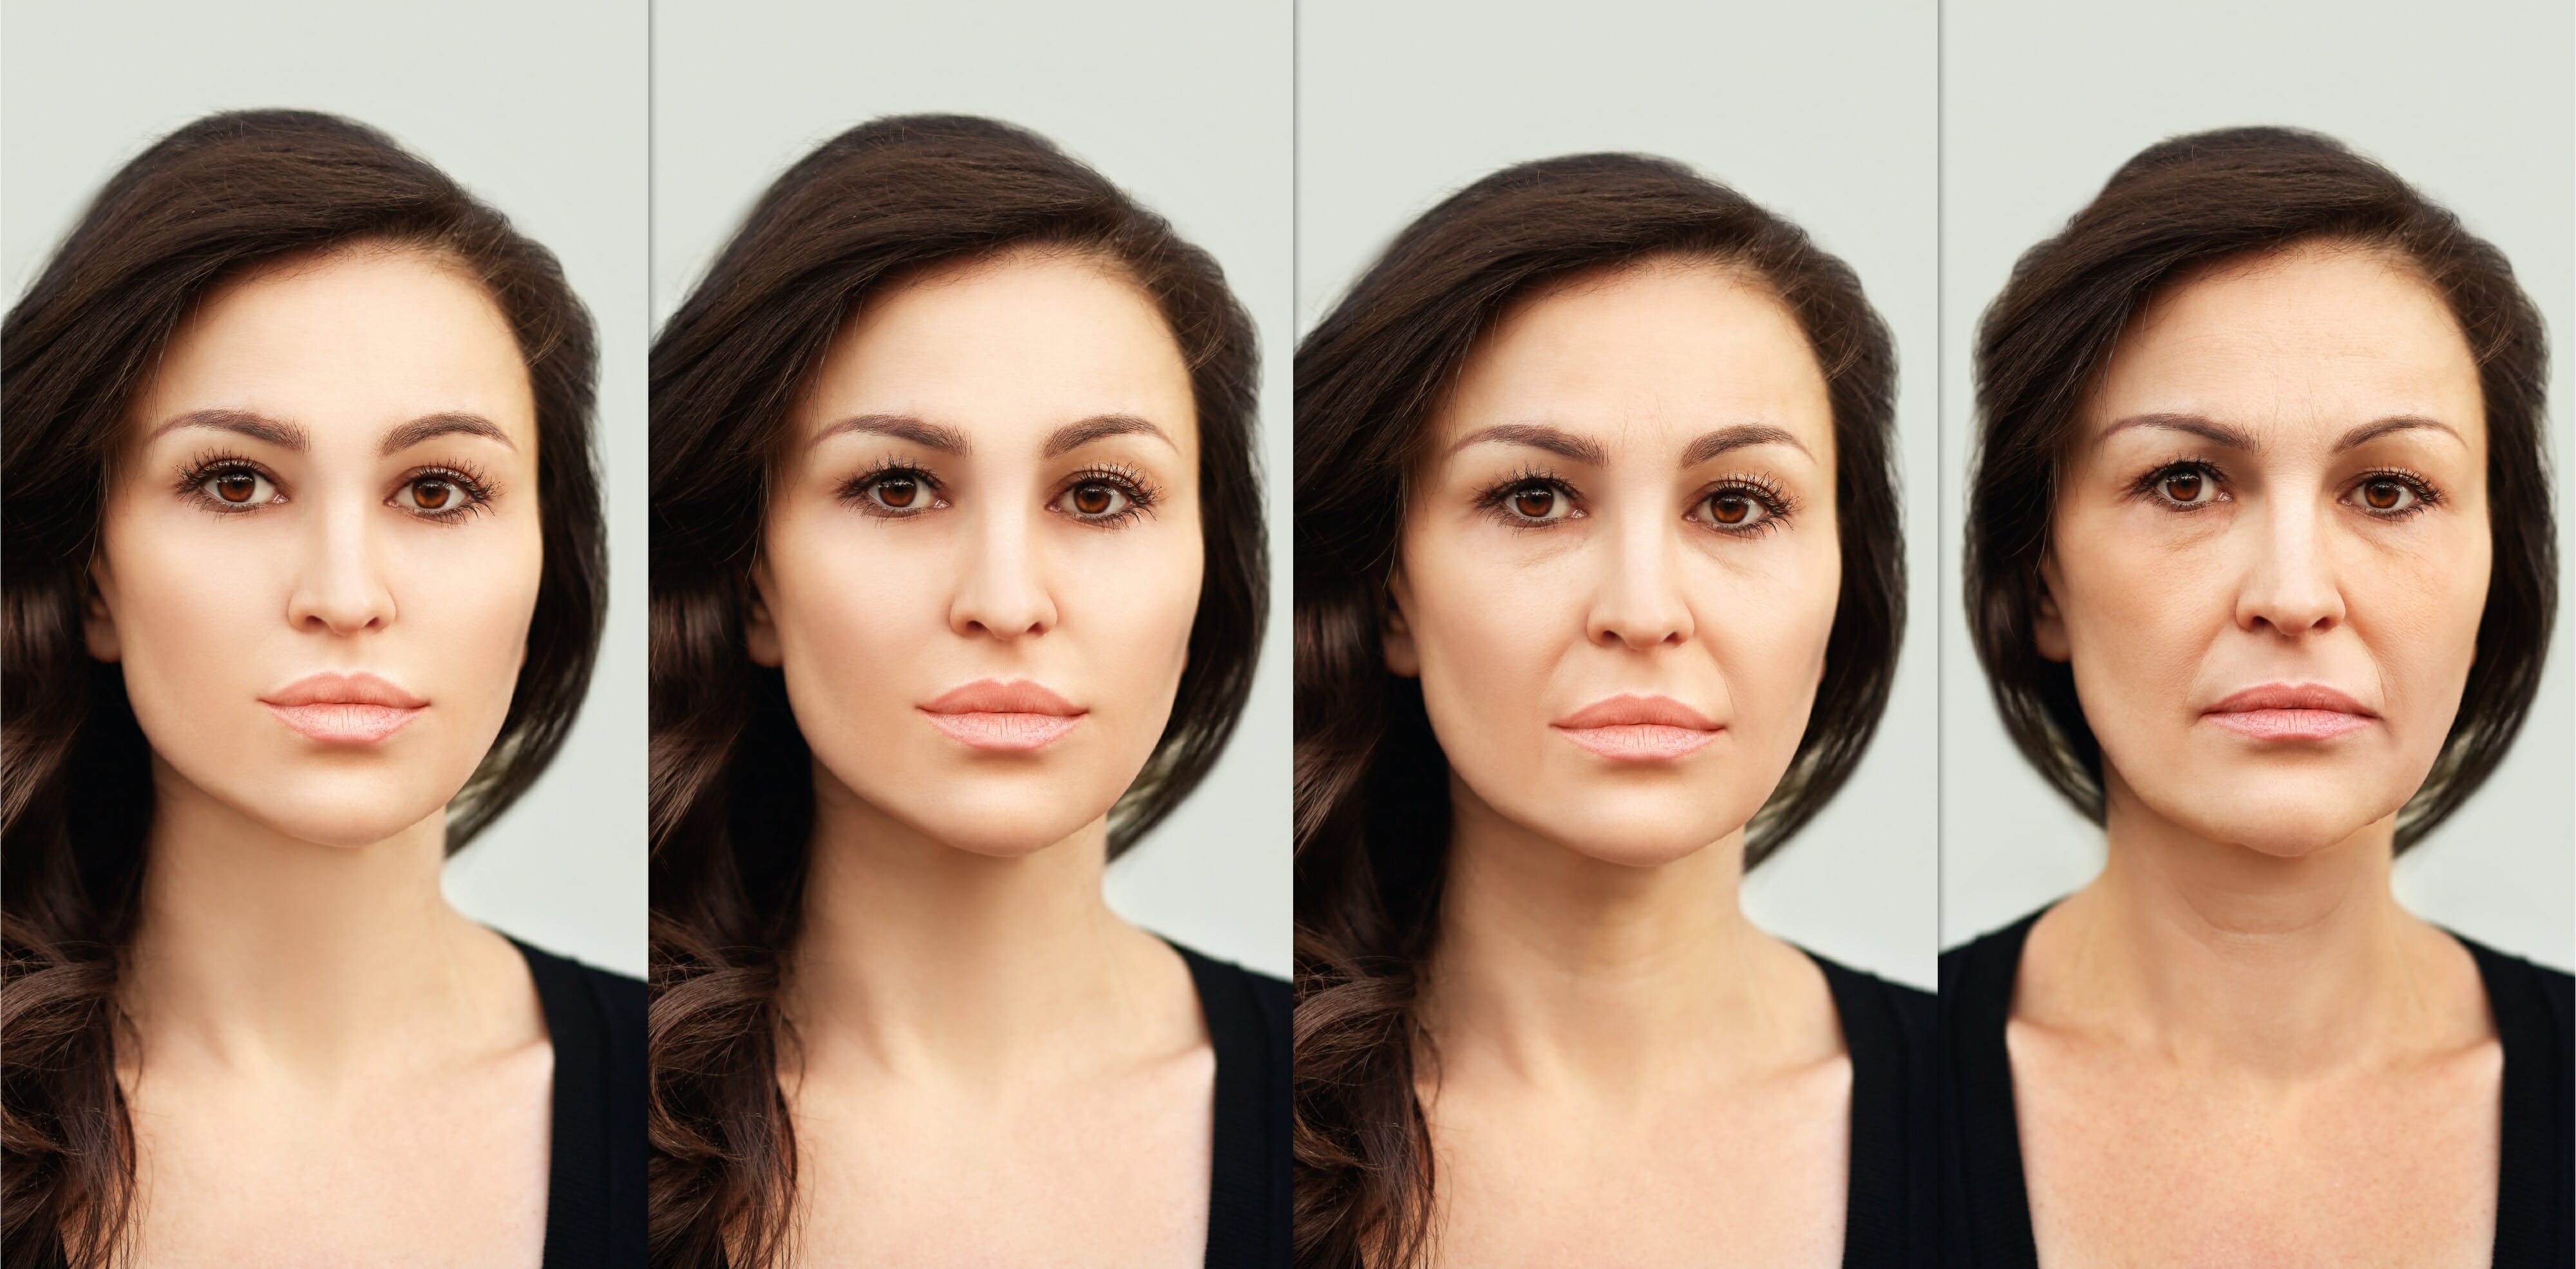 Process of aging. Age changes. Woman of different ages, concept skin aging